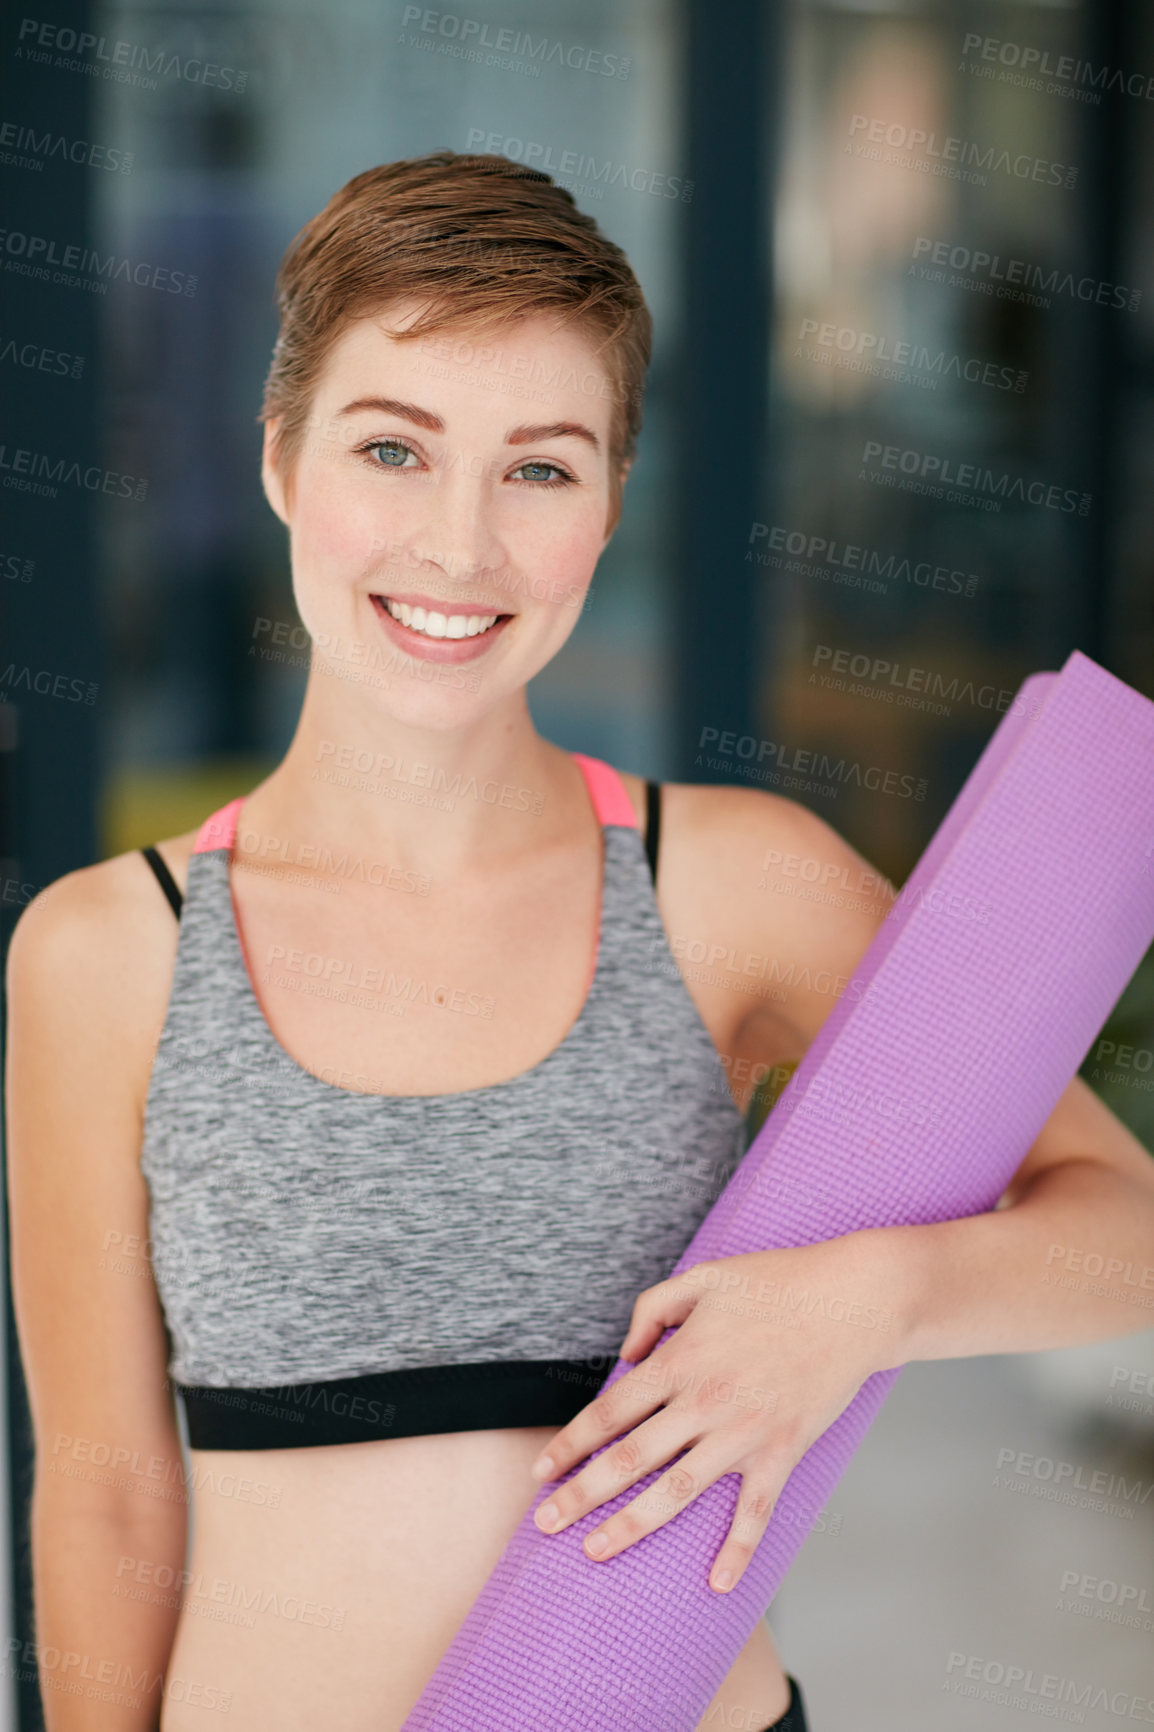 Buy stock photo Portrait of a fit young woman holding an exercise mat